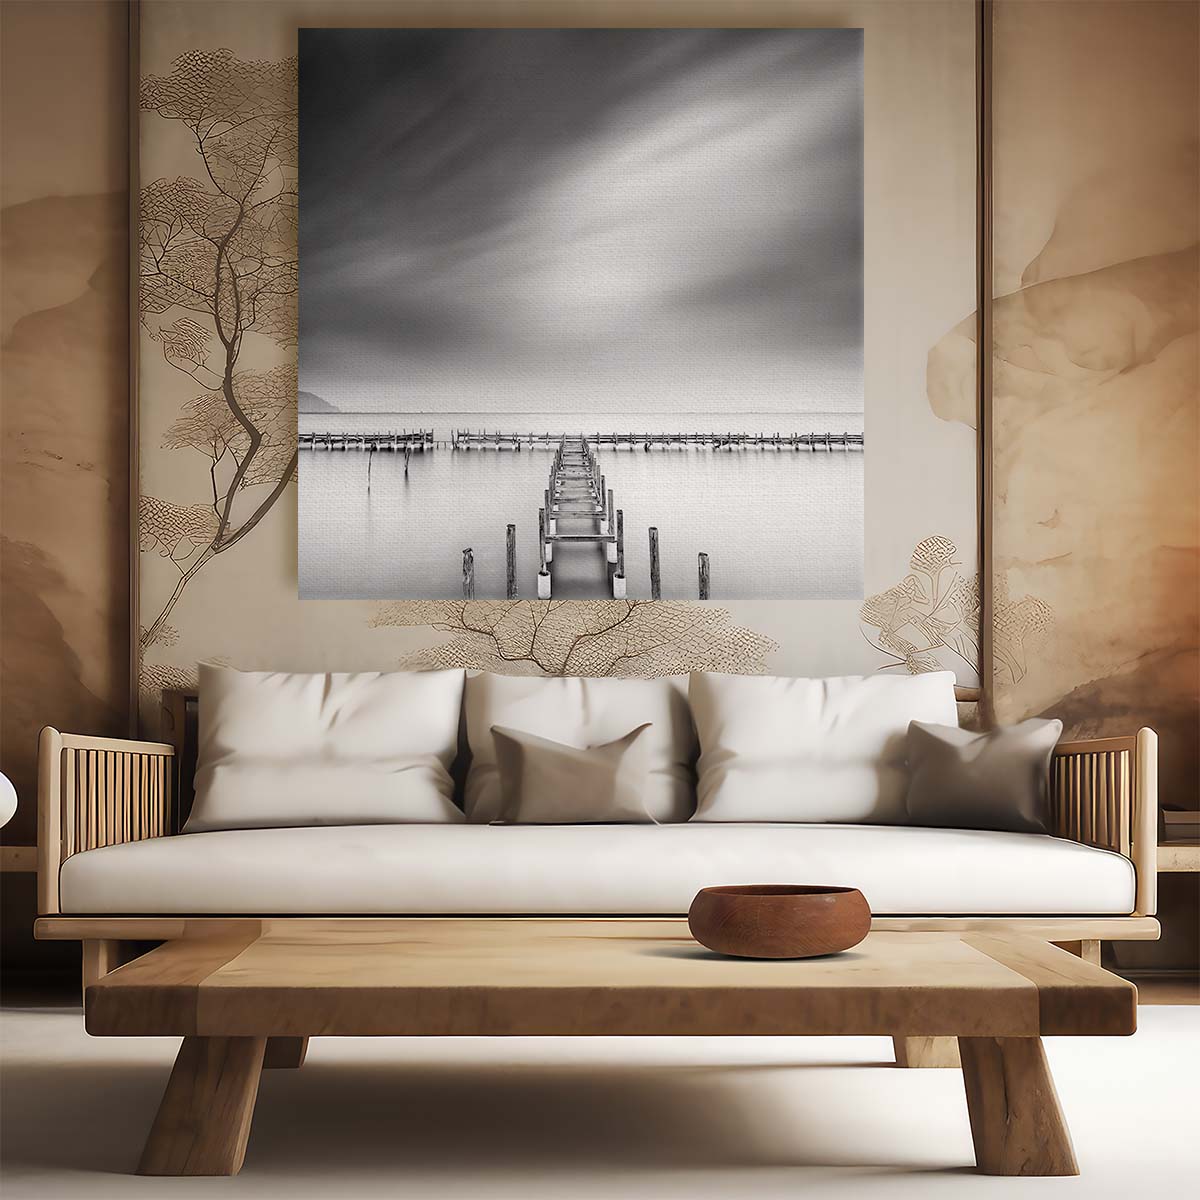 Tranquil Ocean Pier Long Exposure Seascape Photography Wall Art by Luxuriance Designs. Made in USA.